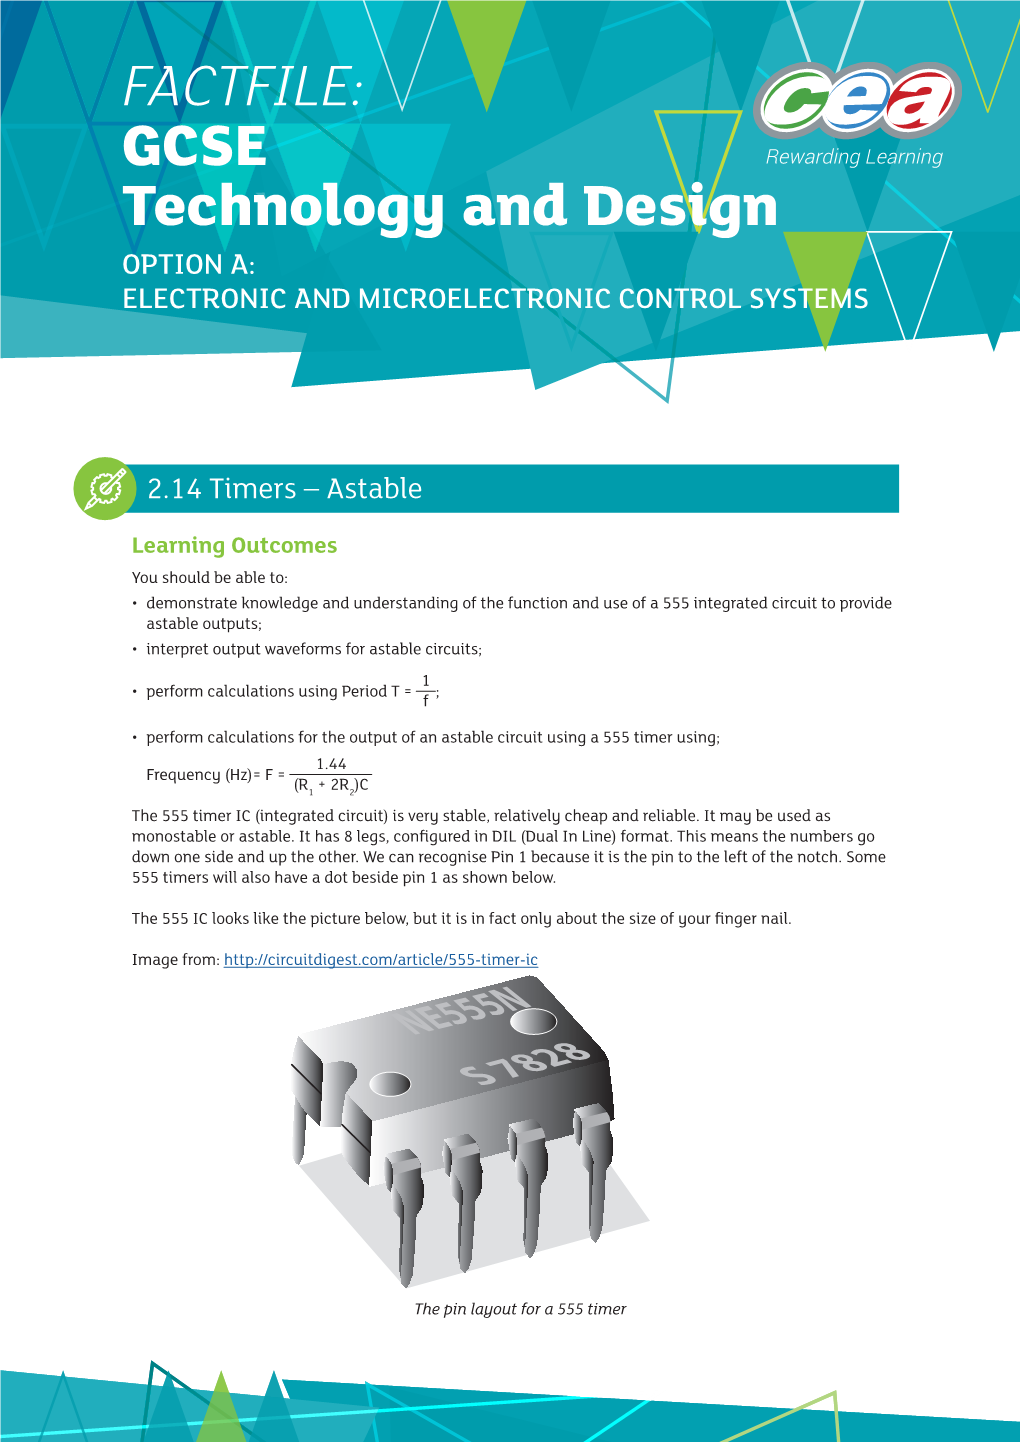 FACTFILE: GCSE Technology and Design OPTION A: ELECTRONIC and MICROELECTRONIC CONTROL SYSTEMS